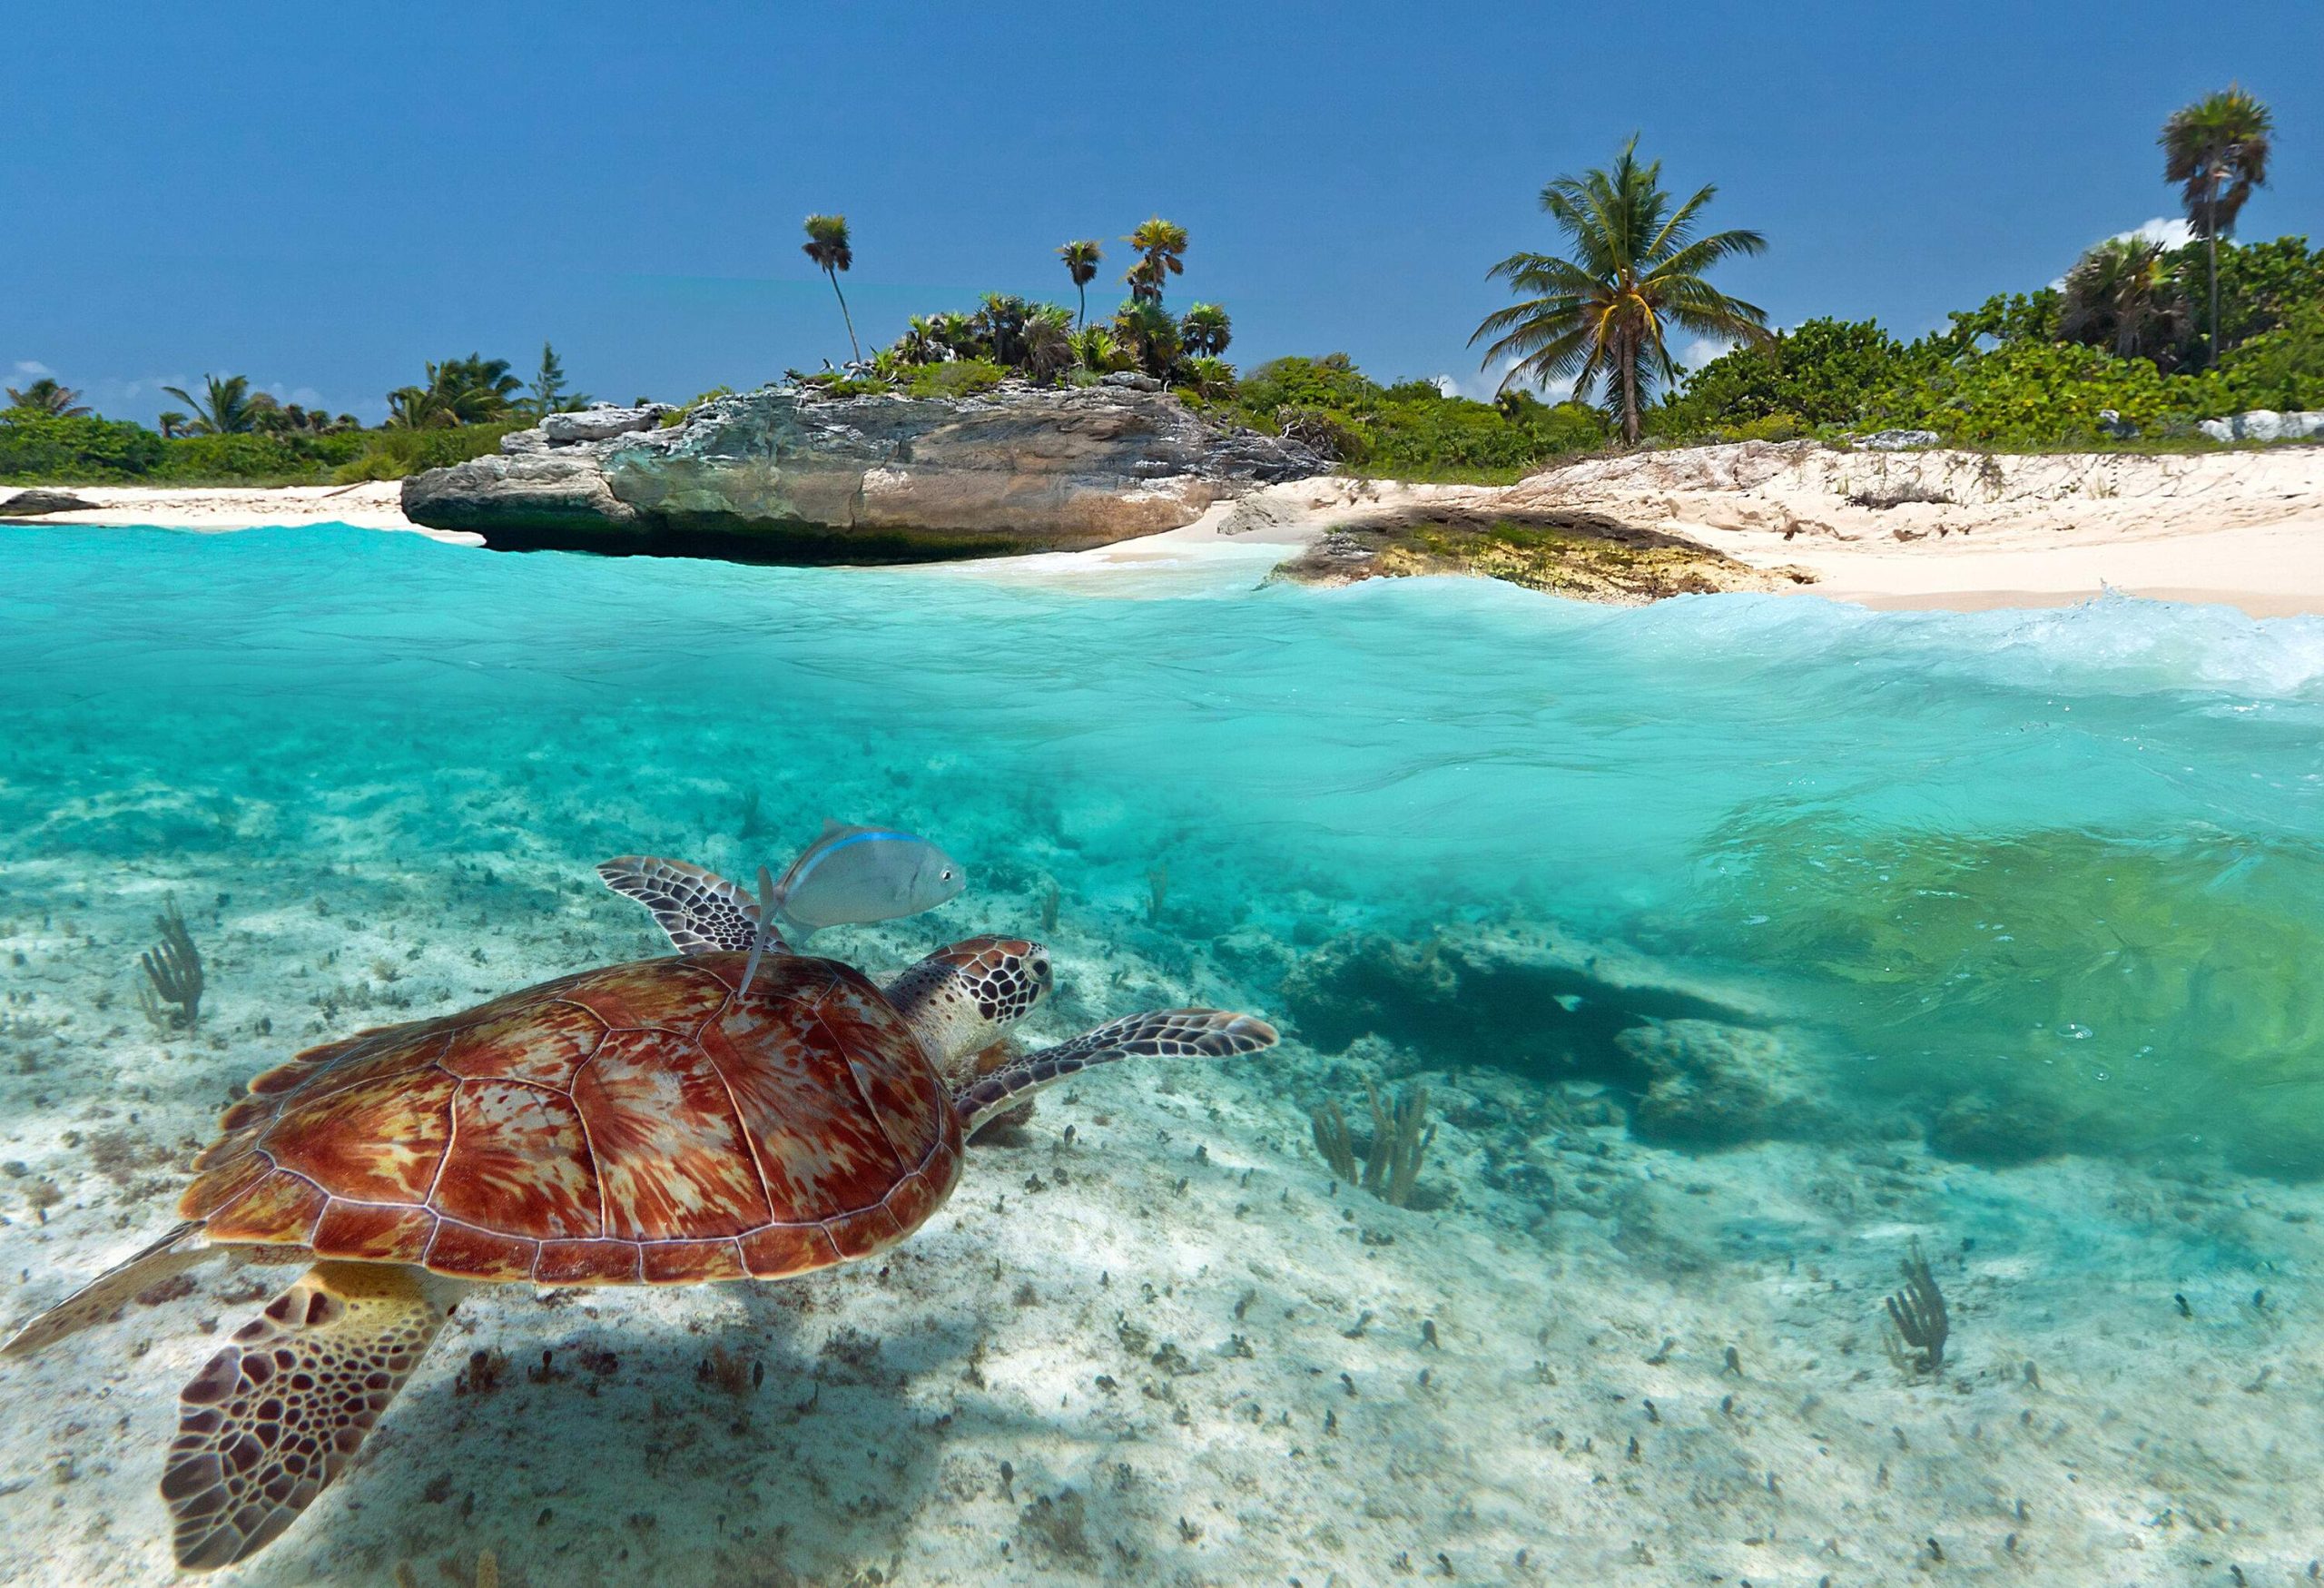 A green sea turtle is swimming in the turquoise waters near a white sand beach with lush green surroundings.